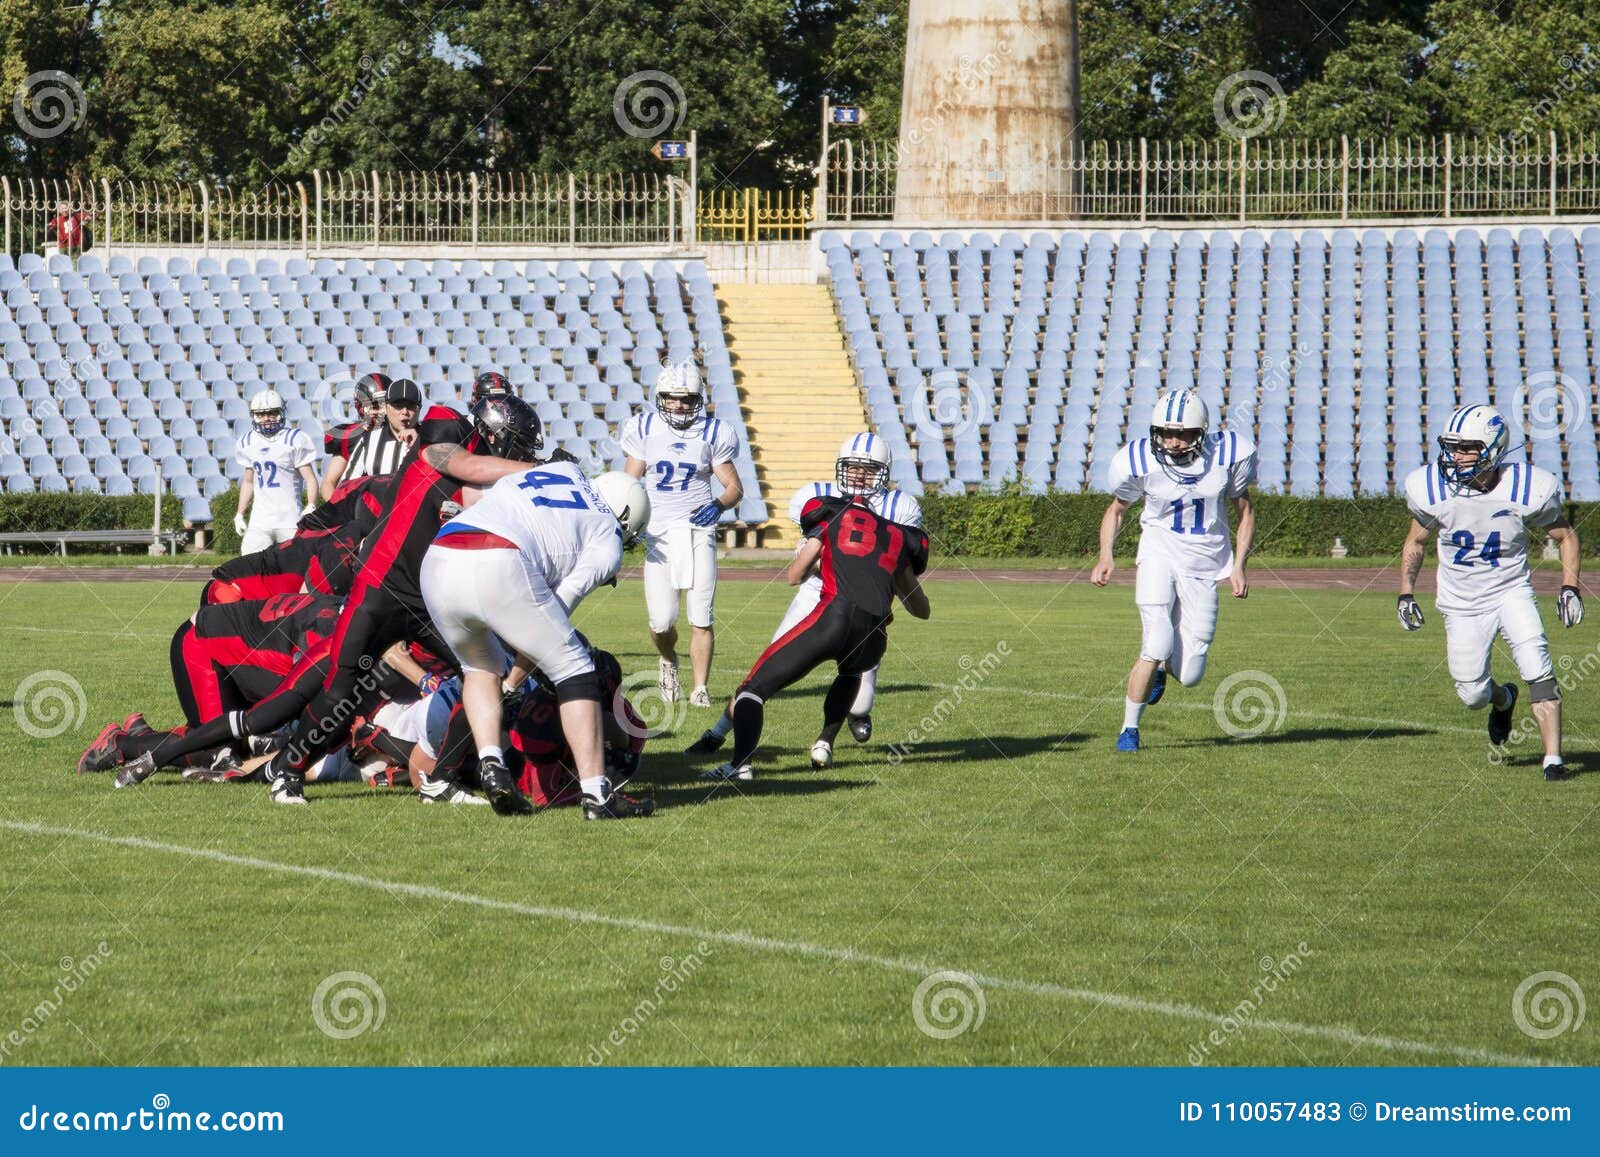 Match on American Football. Editorial Stock Photo - Image of game